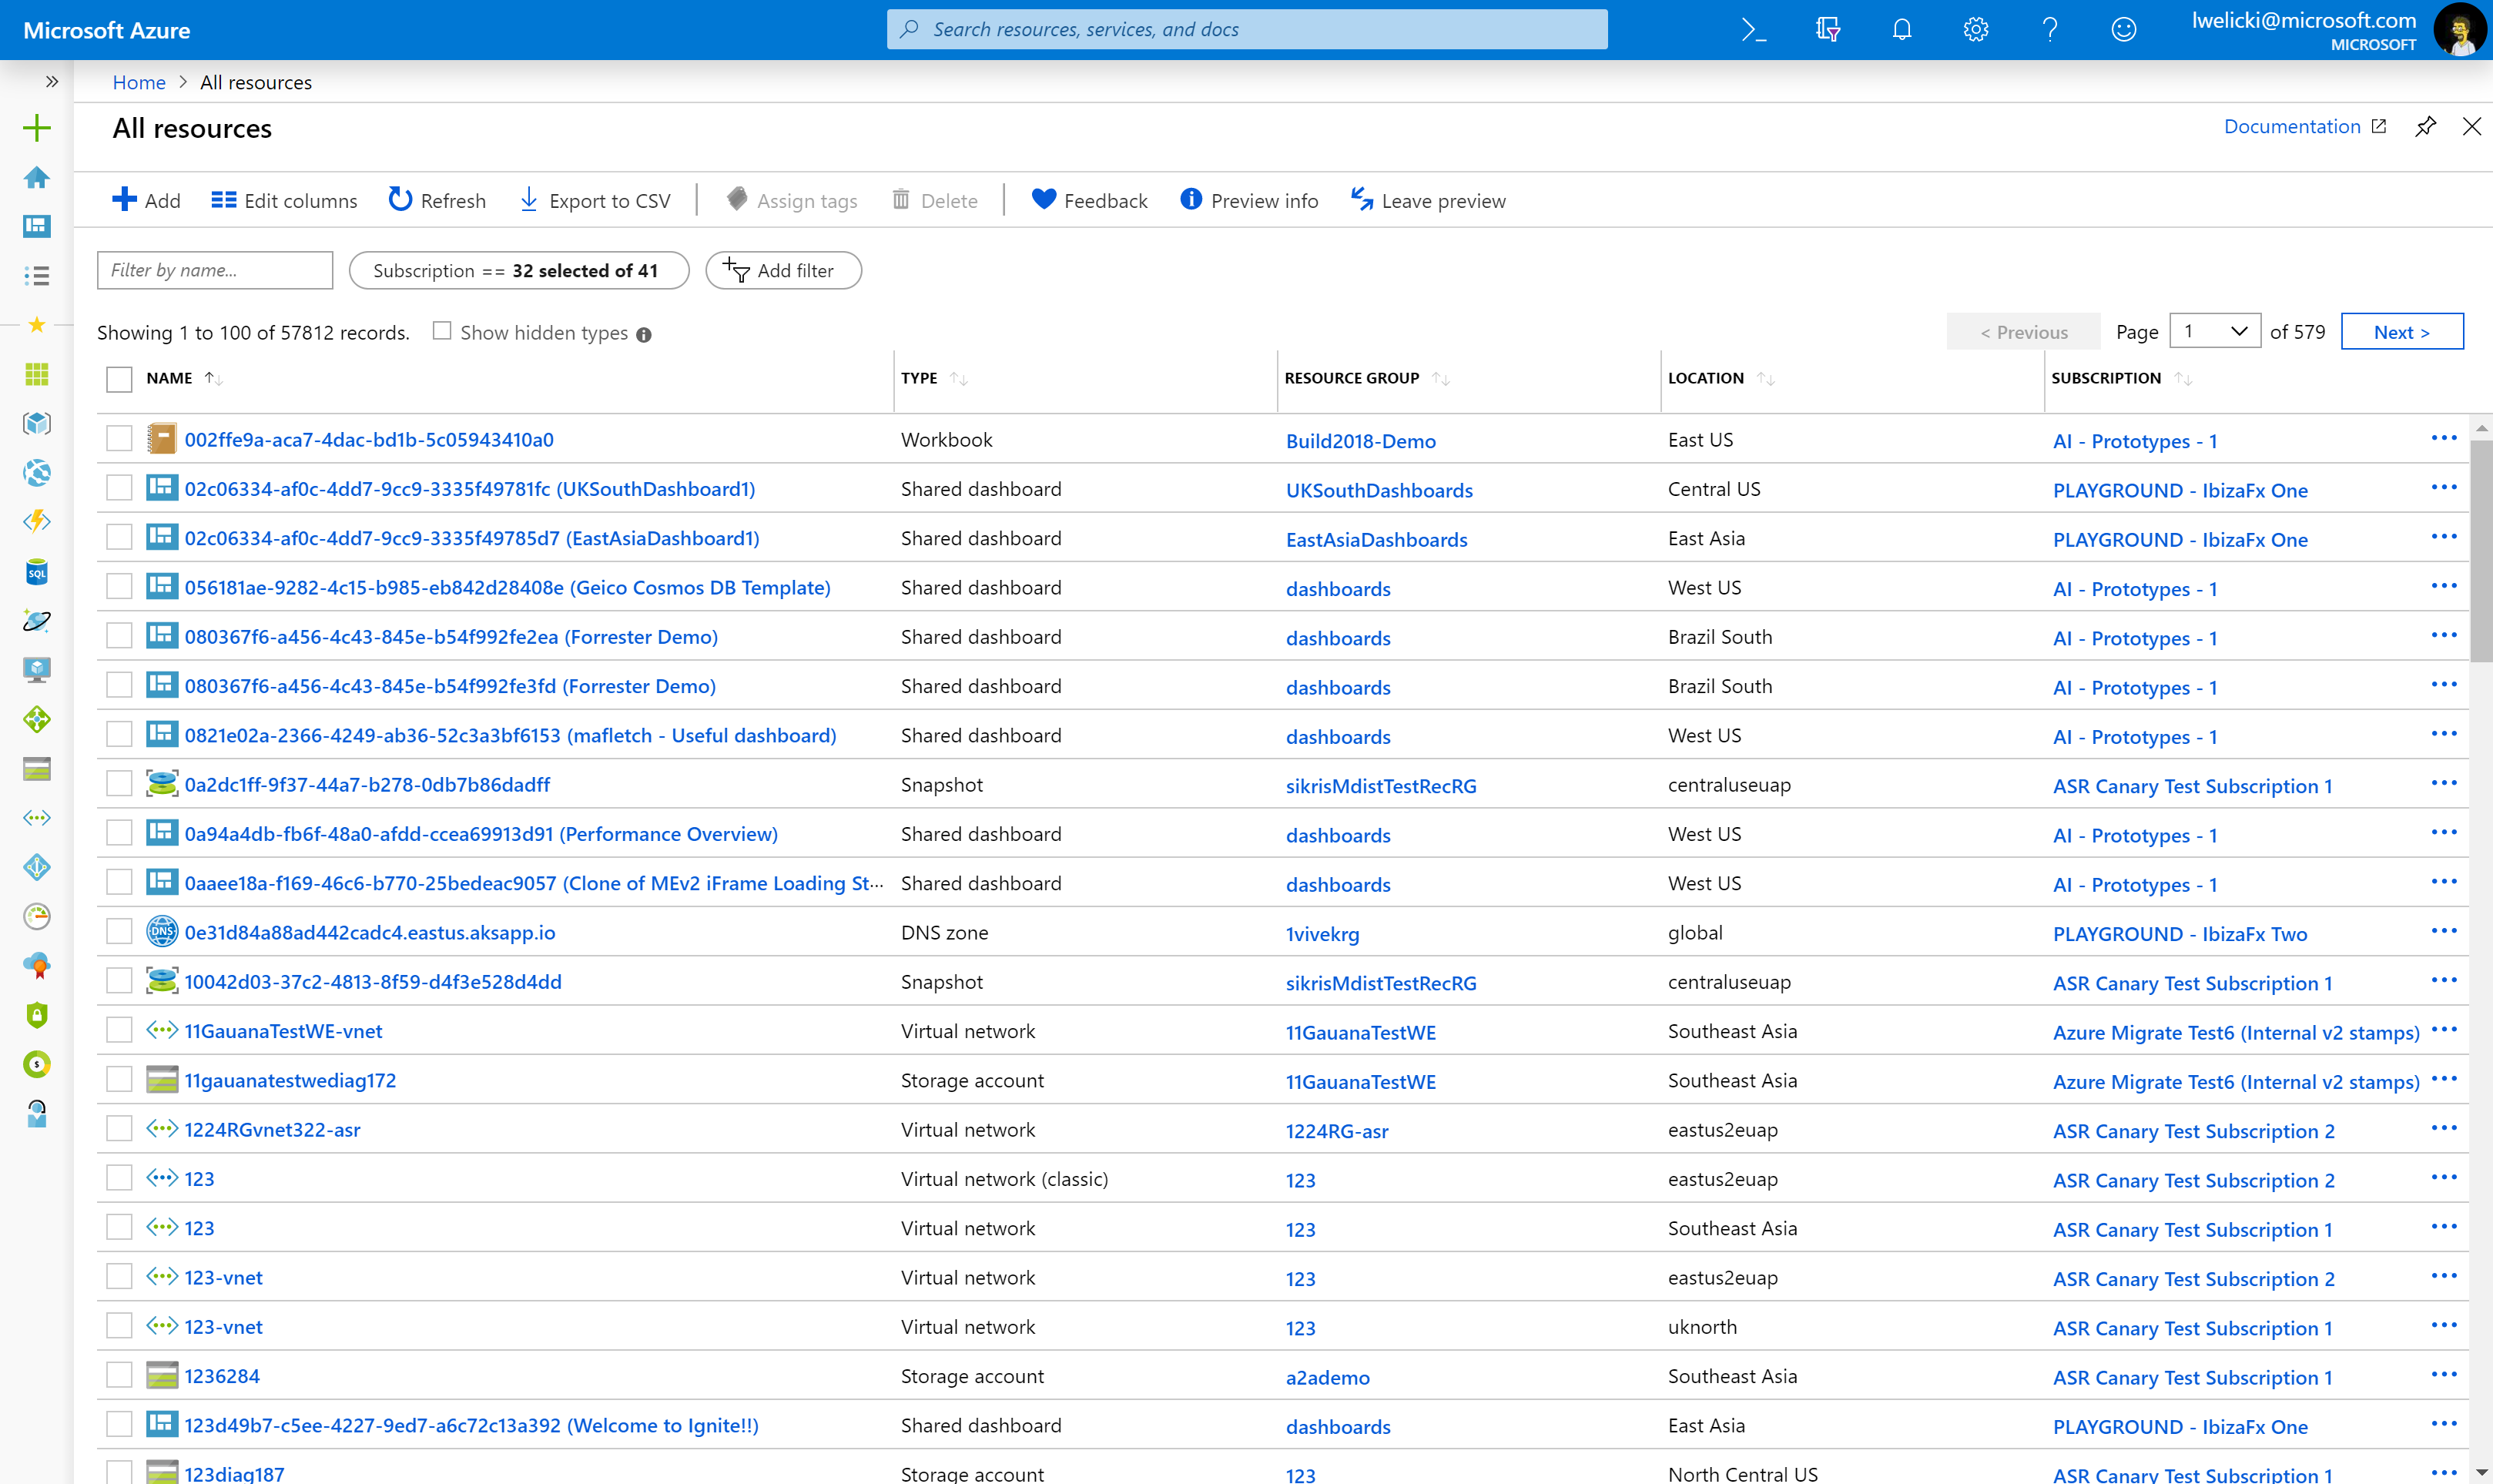 All resources view in the Azure portal